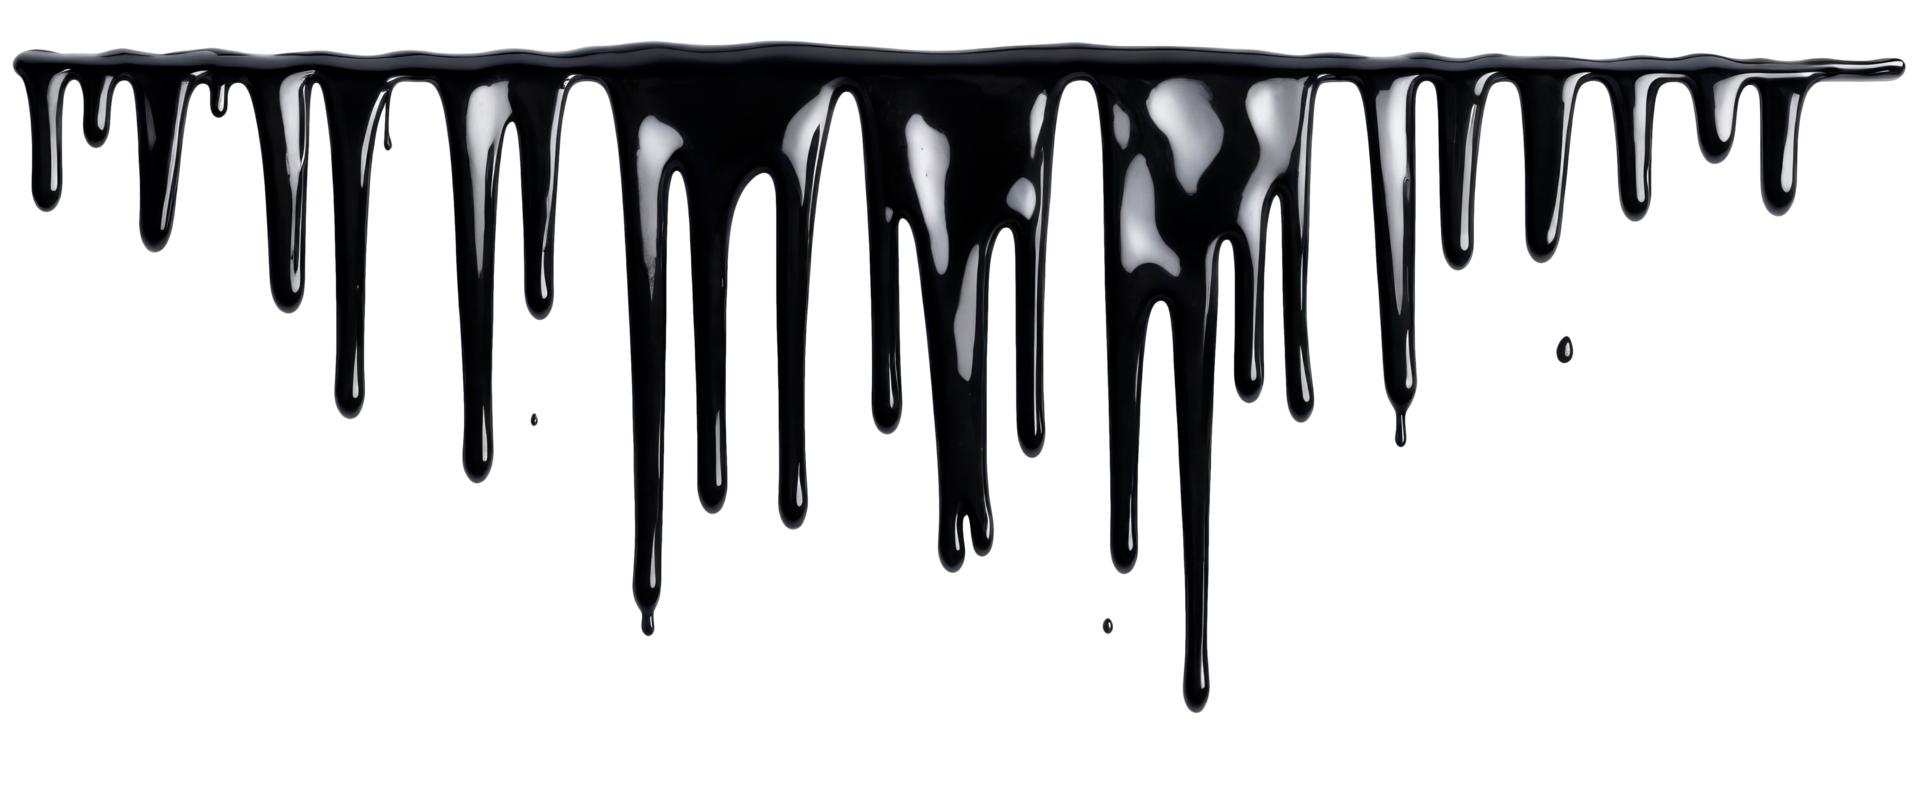 Drip Paint Drips On Black Wallpaper With Dripping Backgrounds